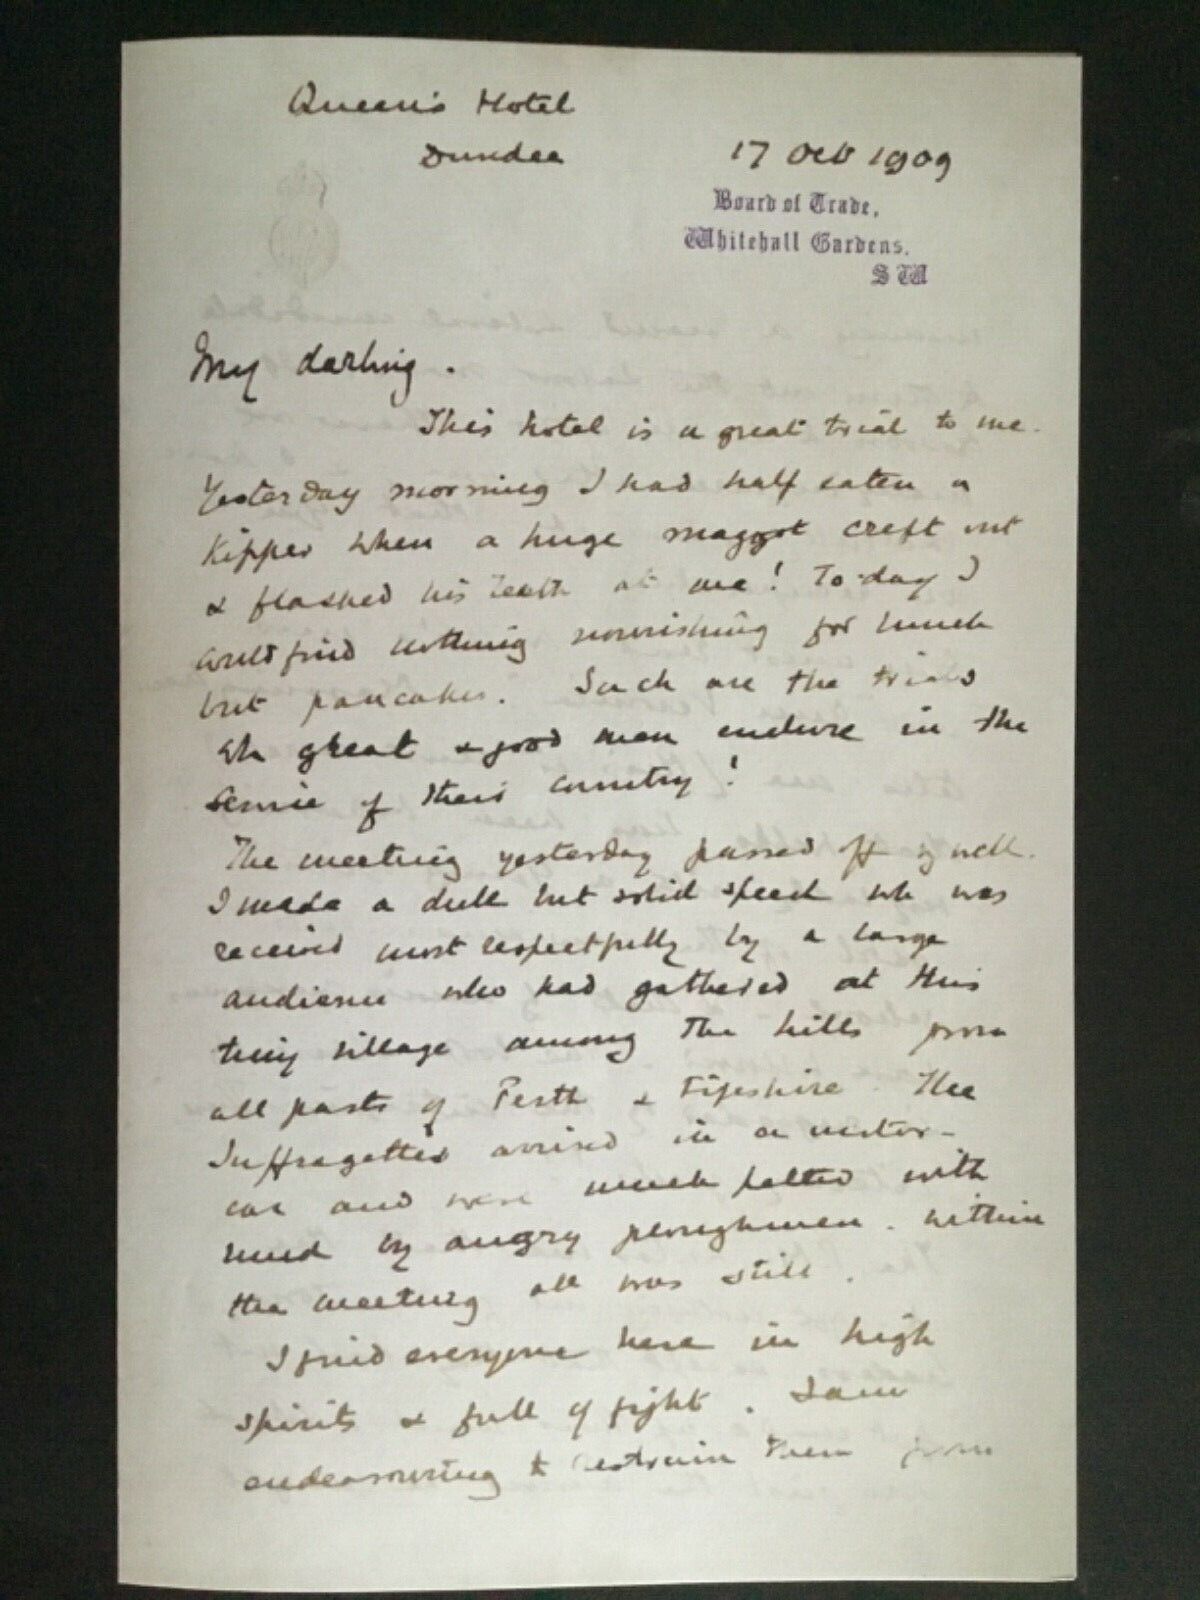 WINSTON CHURCHILL 1909 LOVE LETTER TO CLEMENTINE FROM DUNDEE HOTEL Reproduction